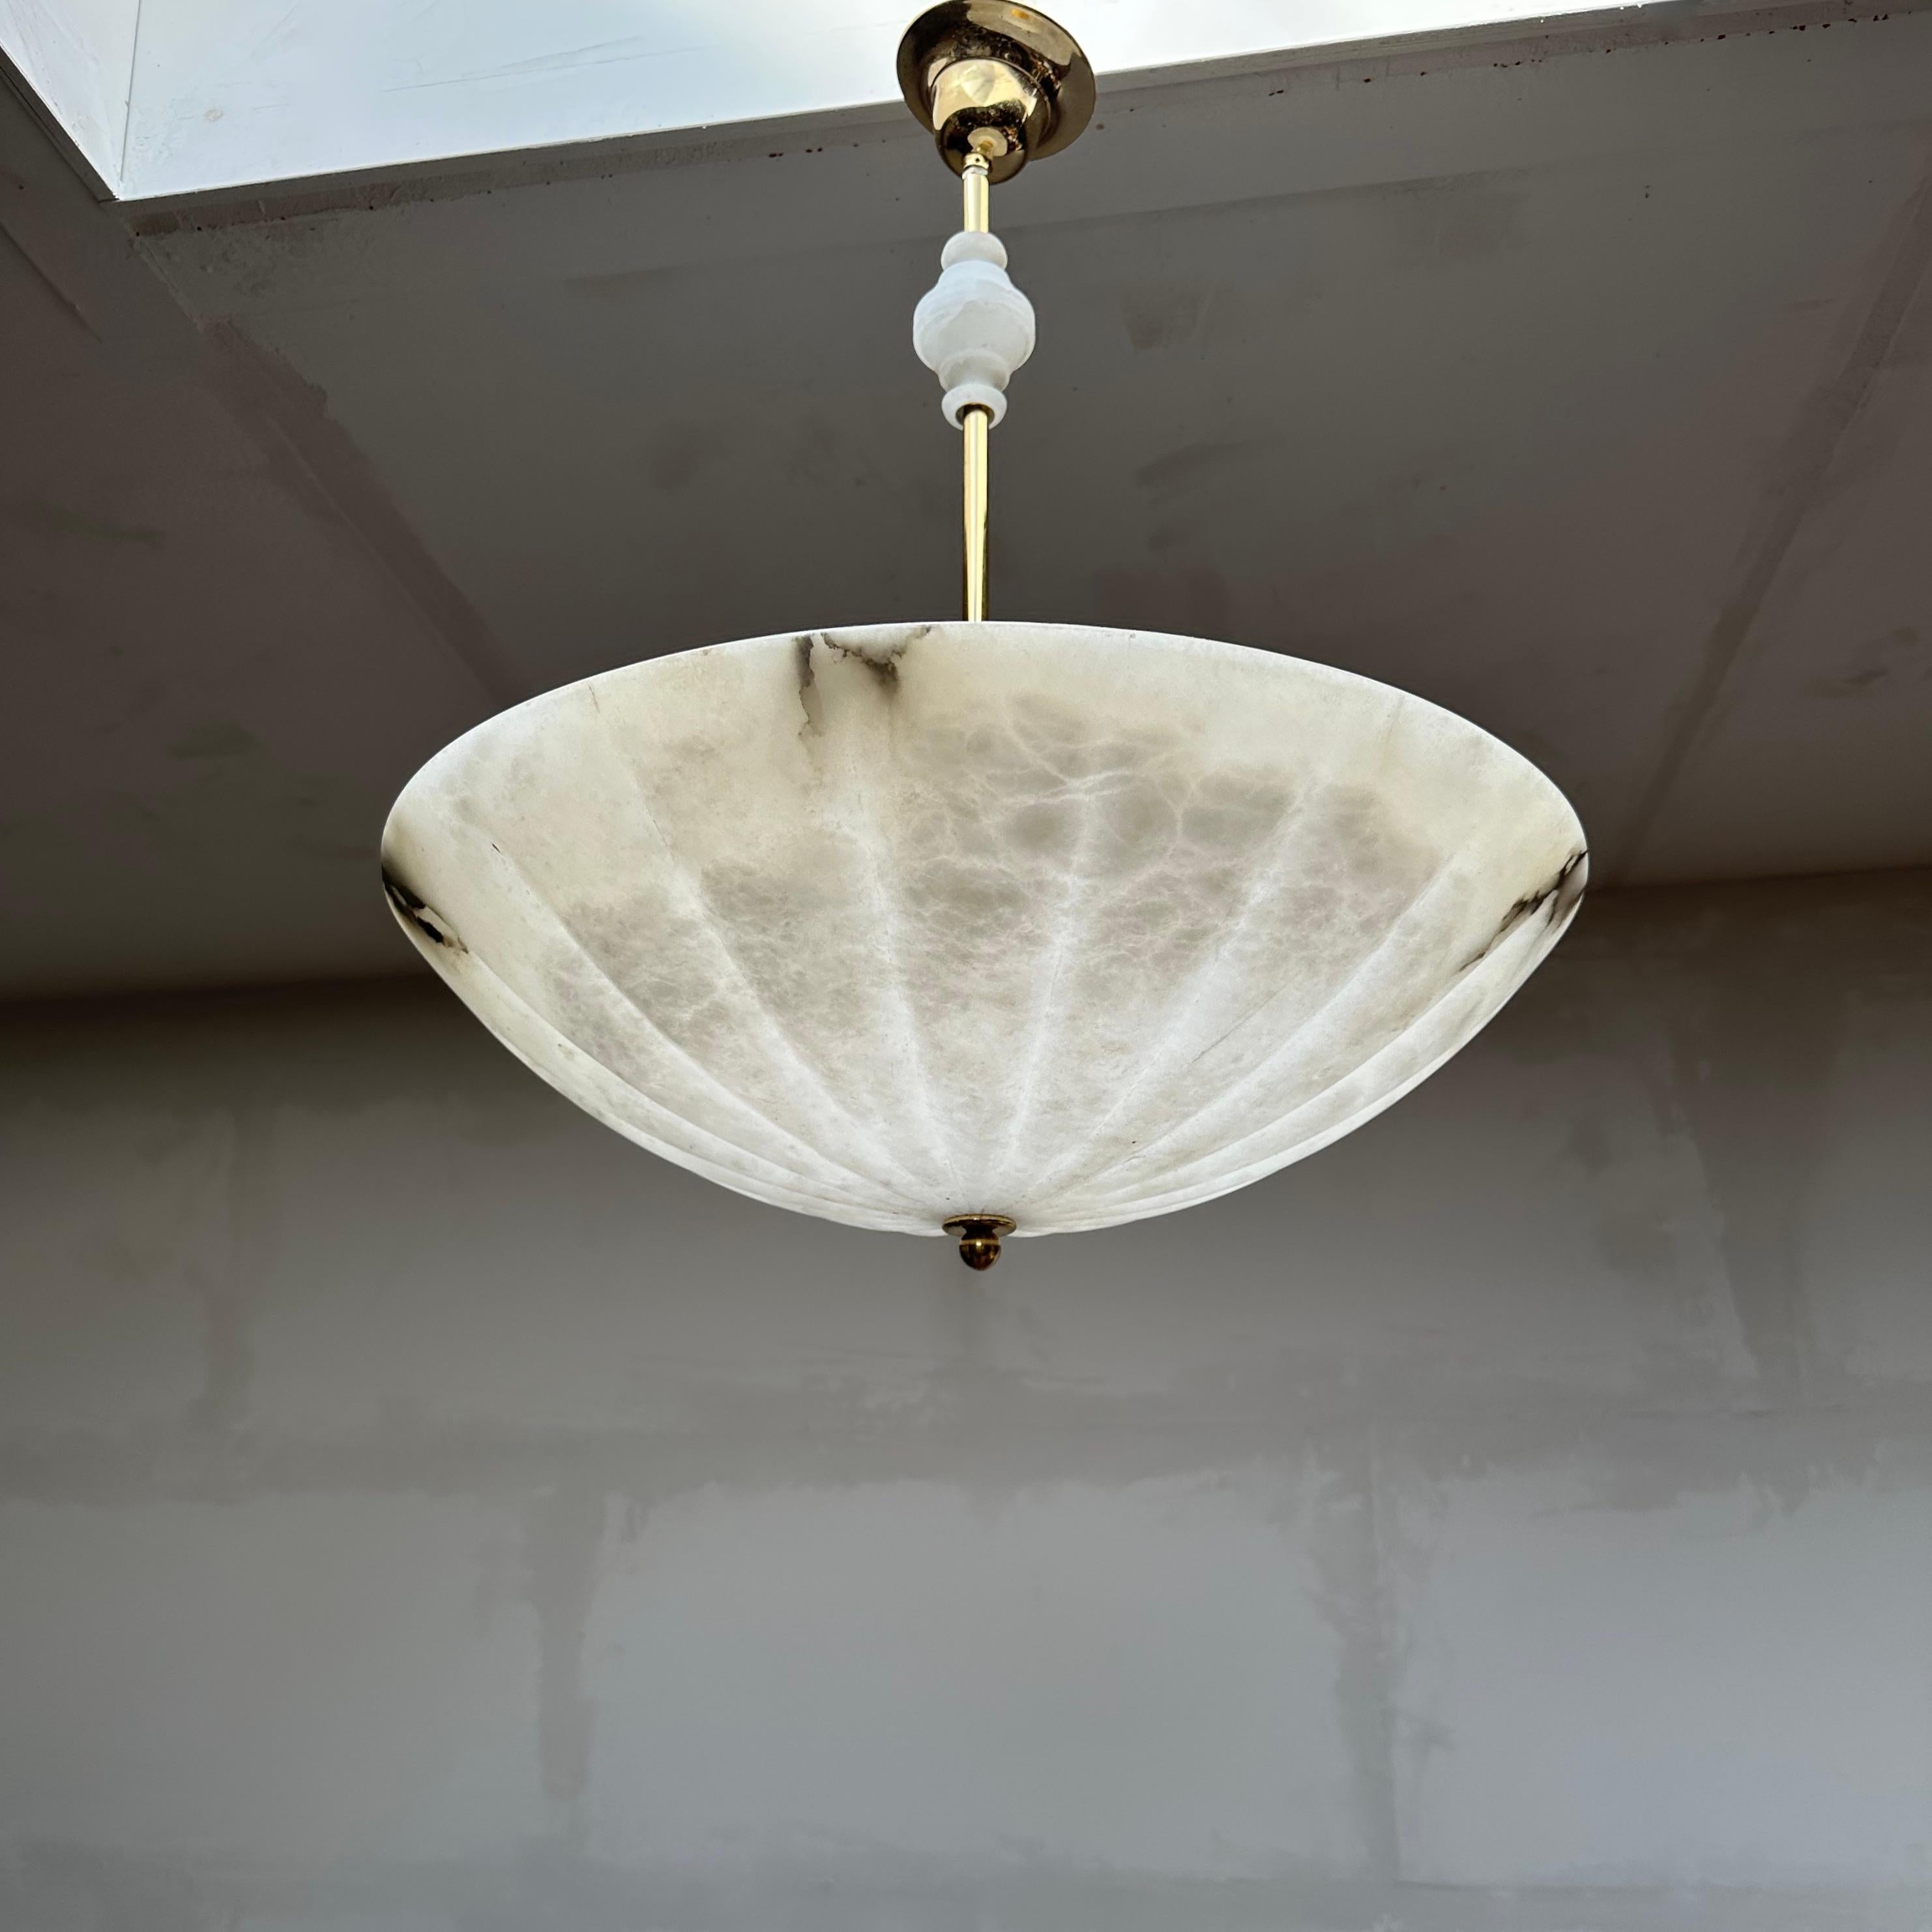 Extra Large, Super Cool Umbrella Design Three Light Alabaster Chandelier Pendant In Excellent Condition For Sale In Lisse, NL